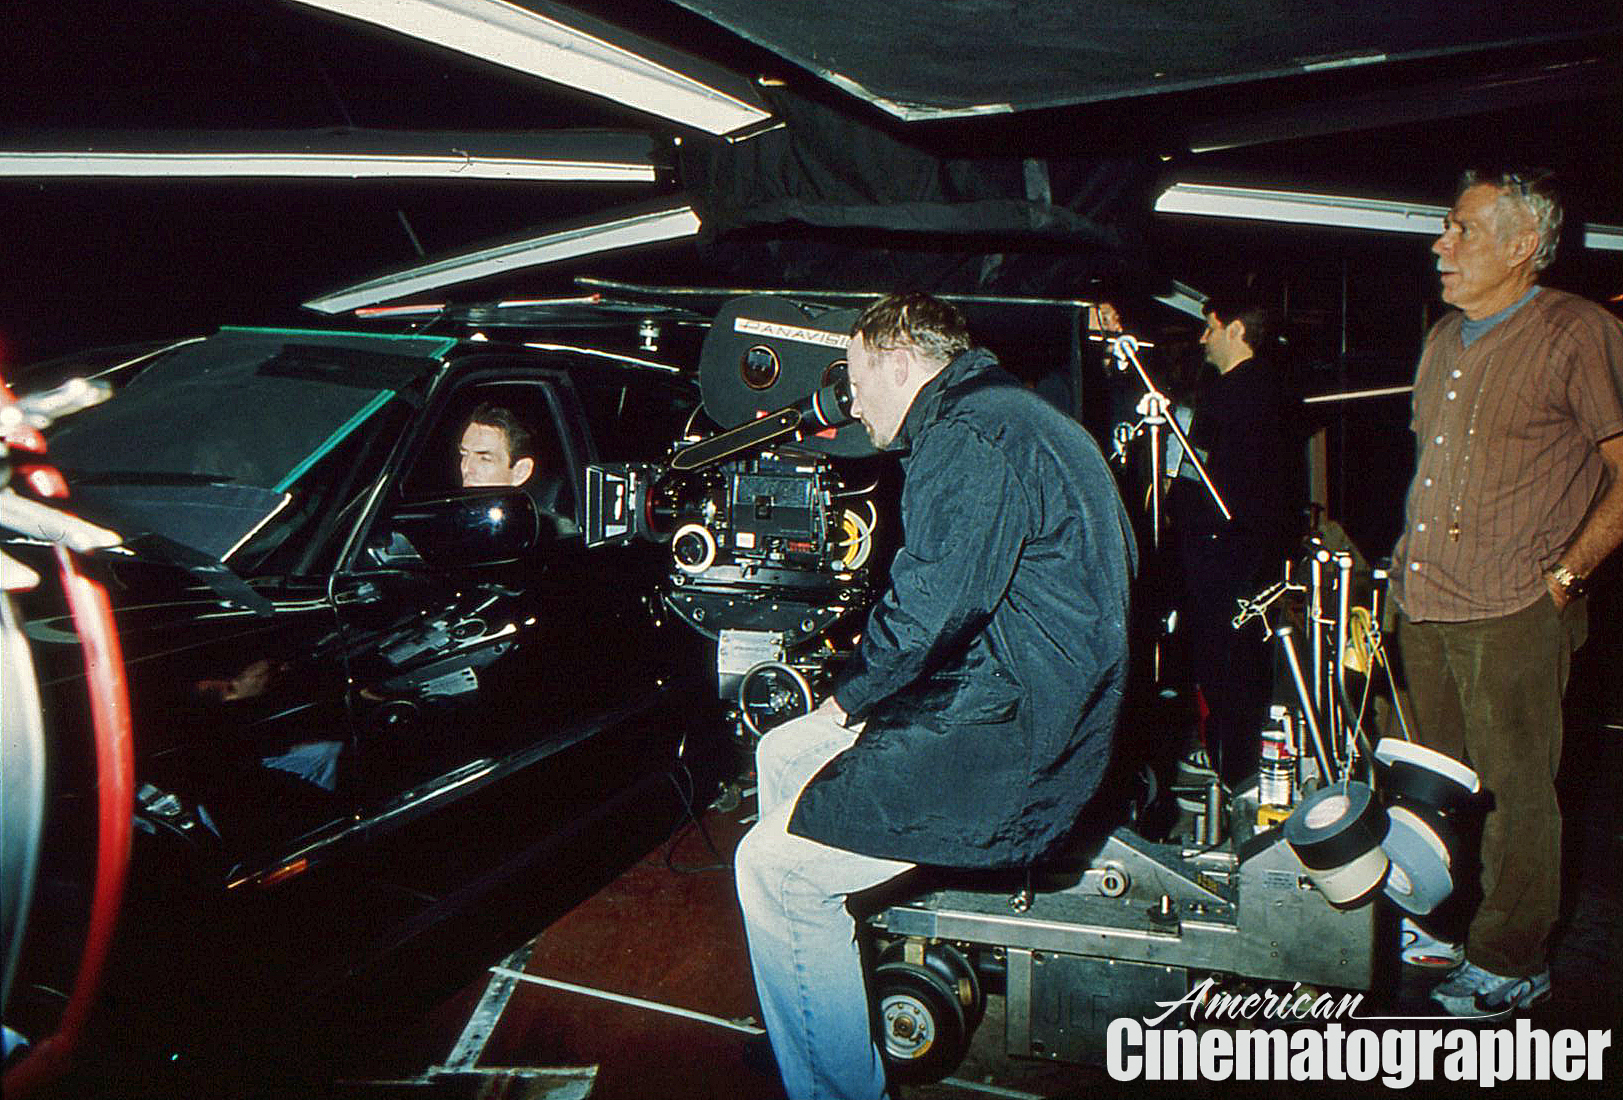 Fincher takes a look through the eyepiece while shooting car work employing a helicopter-like lighting rig in conjunction with rear-projection using VistaVision plates. The rig was built by gaffer Claudio Miranda, who later became an ASC member.